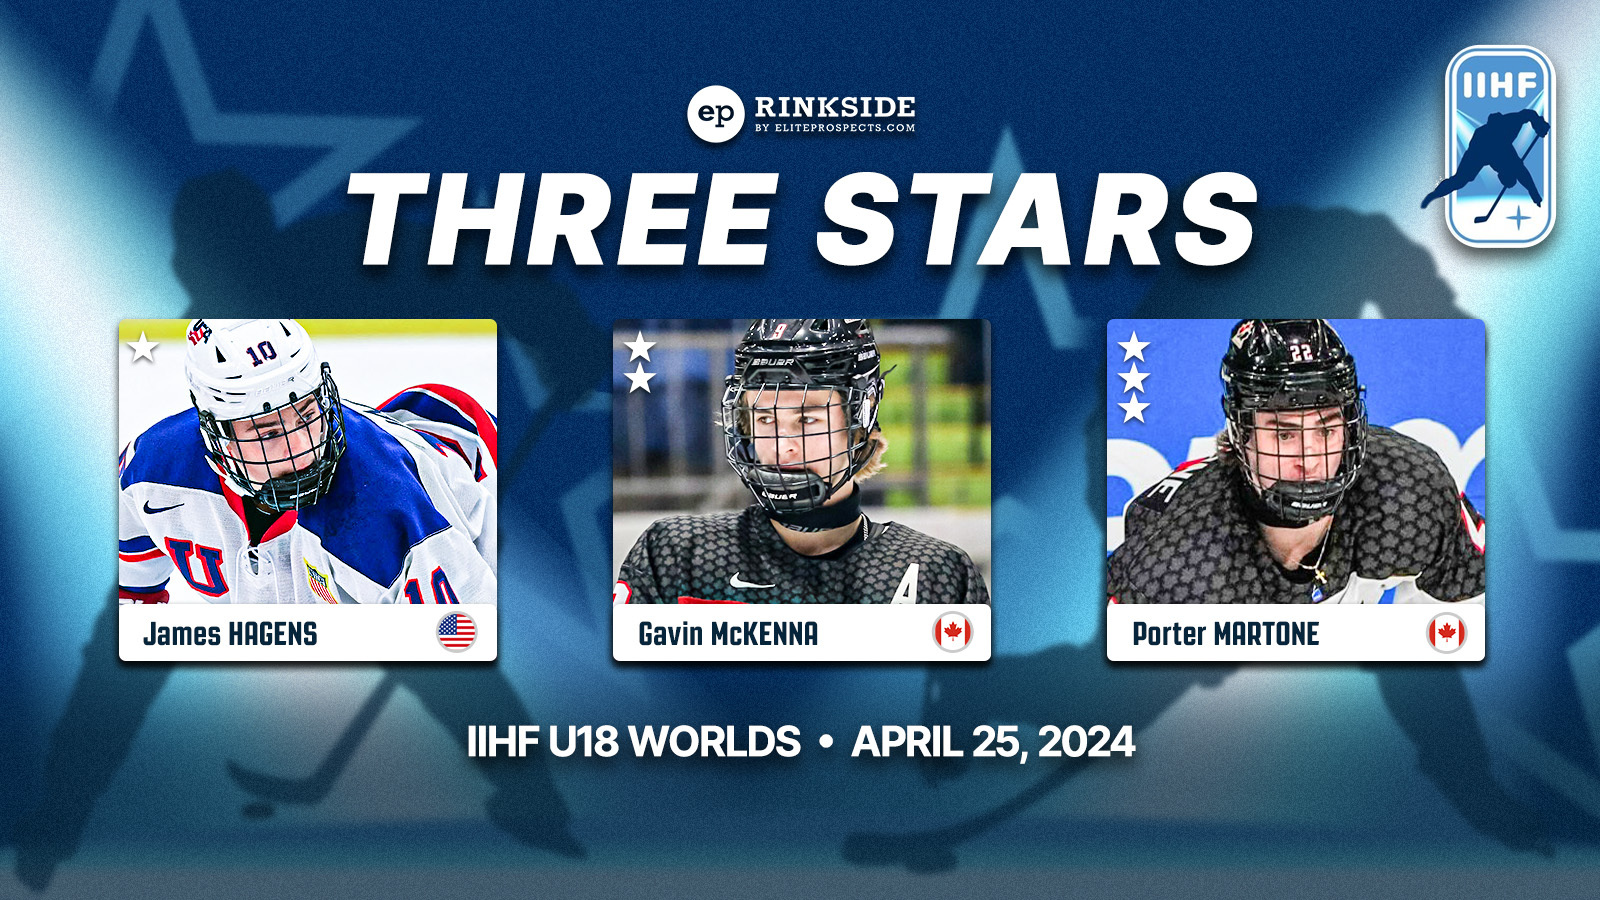 EP Rinkside's 3 Stars from Day 1 of the 2024 U18 World Hockey Championship